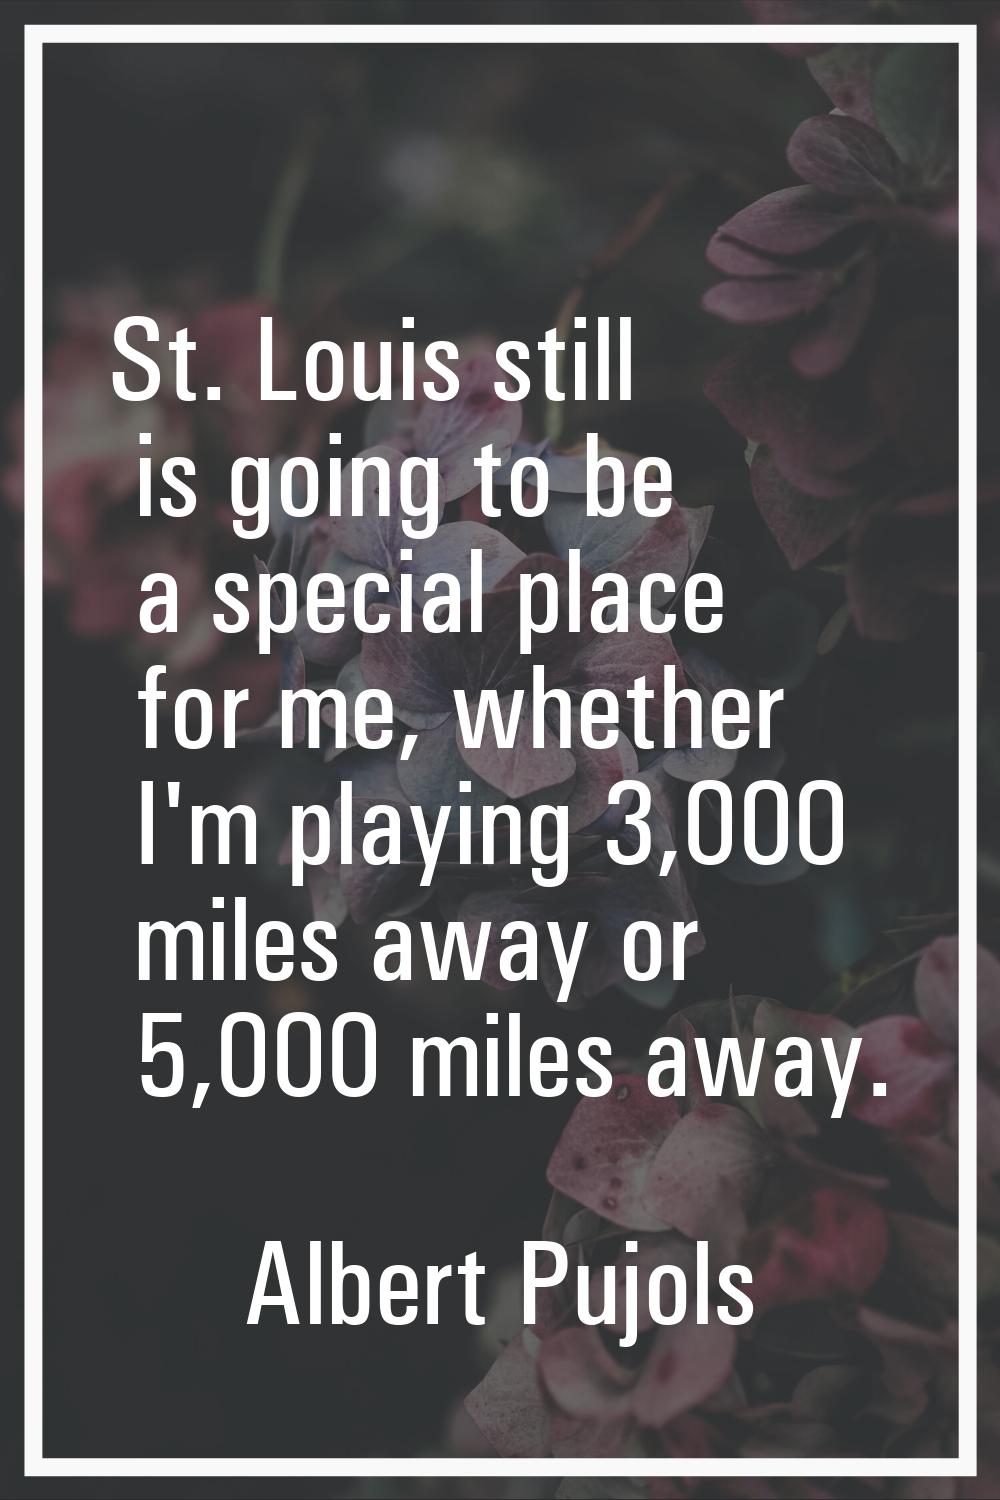 St. Louis still is going to be a special place for me, whether I'm playing 3,000 miles away or 5,00